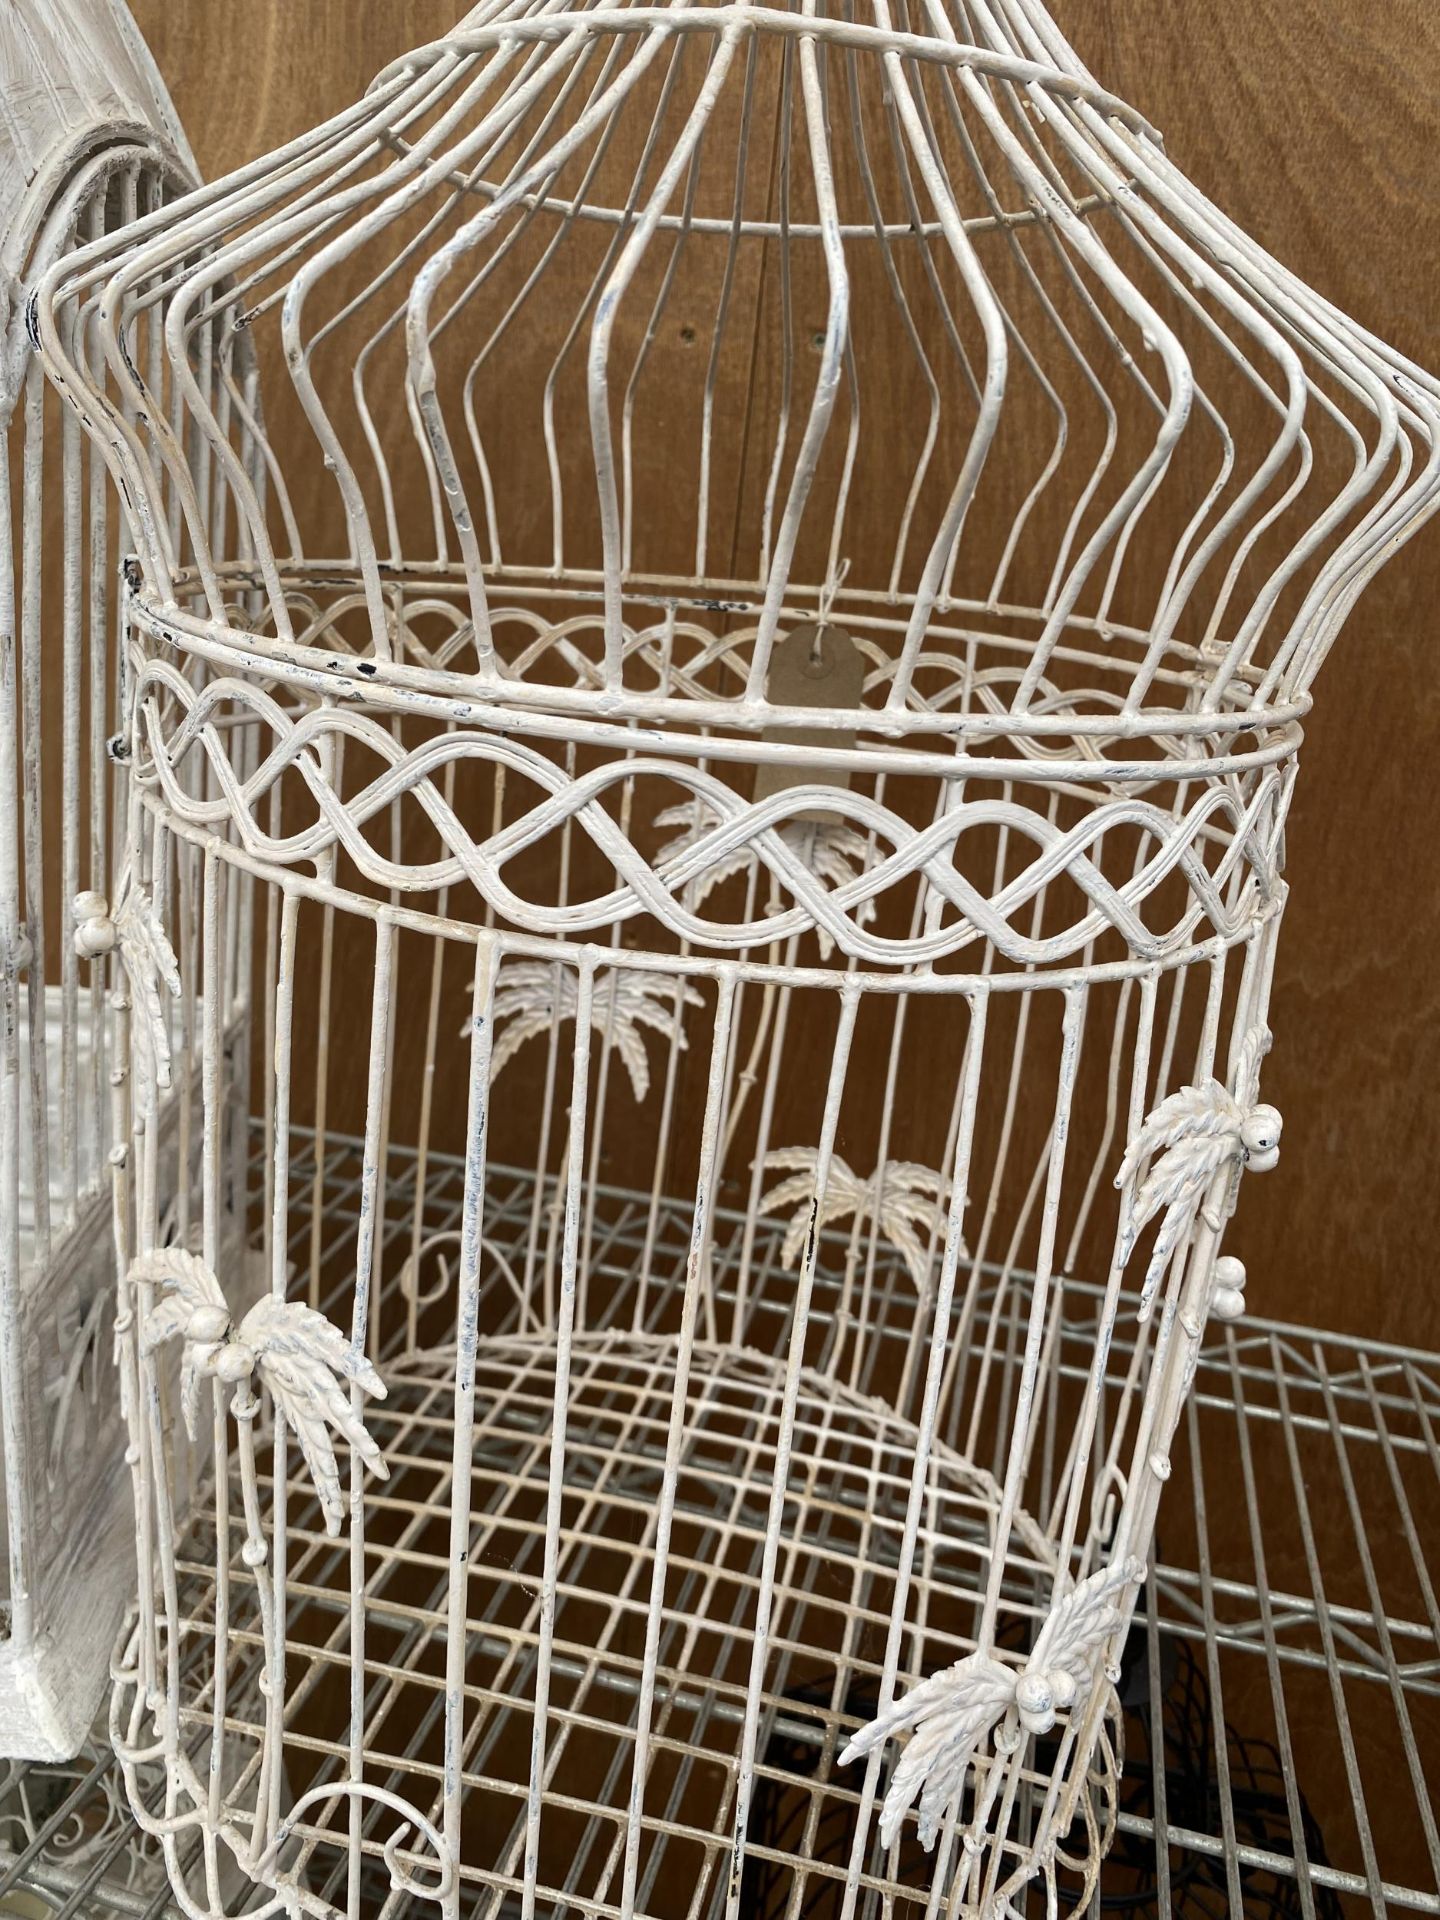 TWO DECORATIVE METAL BIRD CAGES - Image 3 of 5